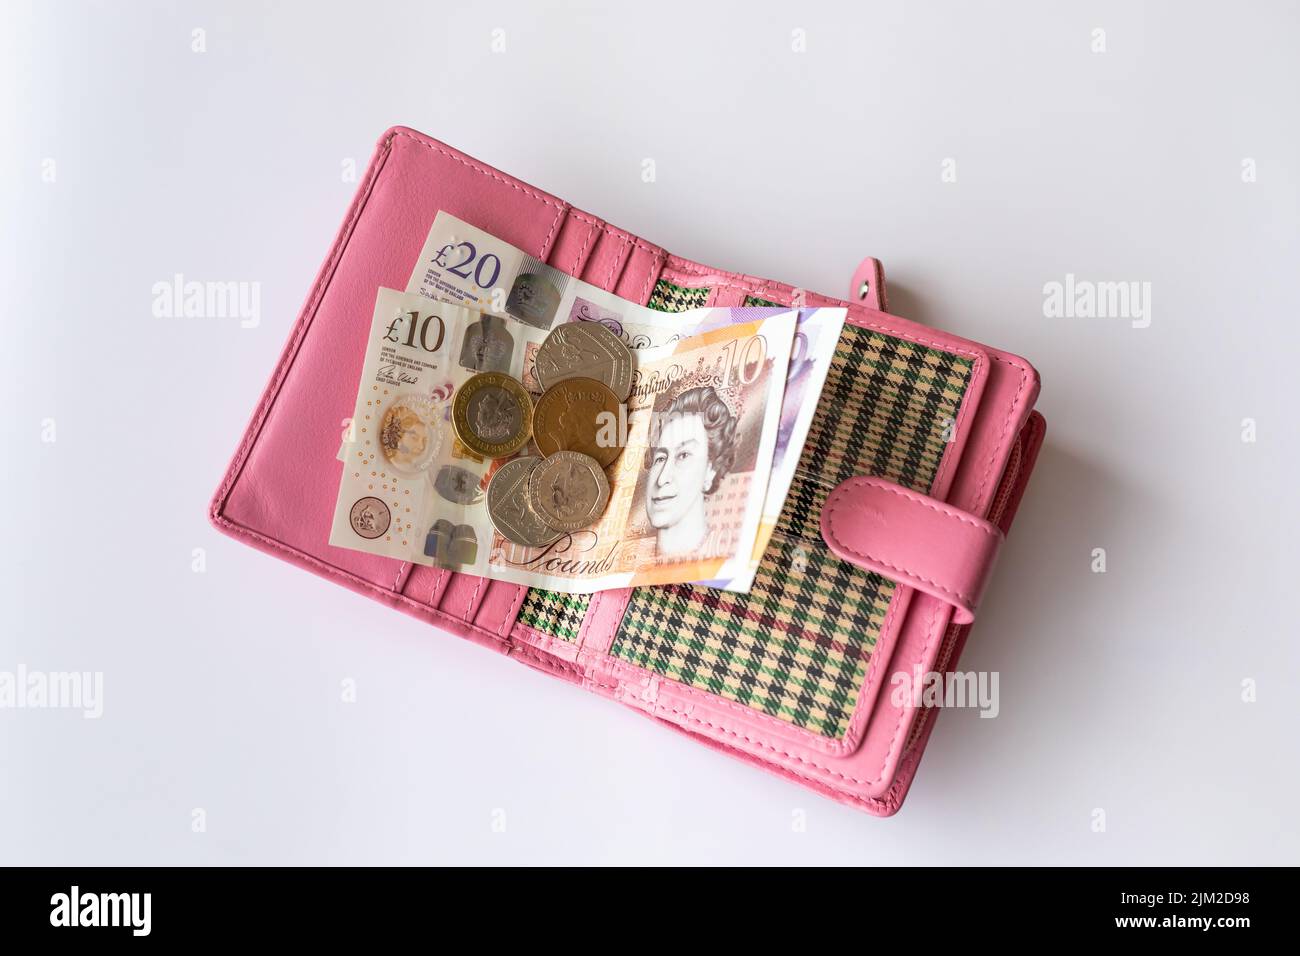 Pink purse with English banknotes and coins closeup. Stock Photo